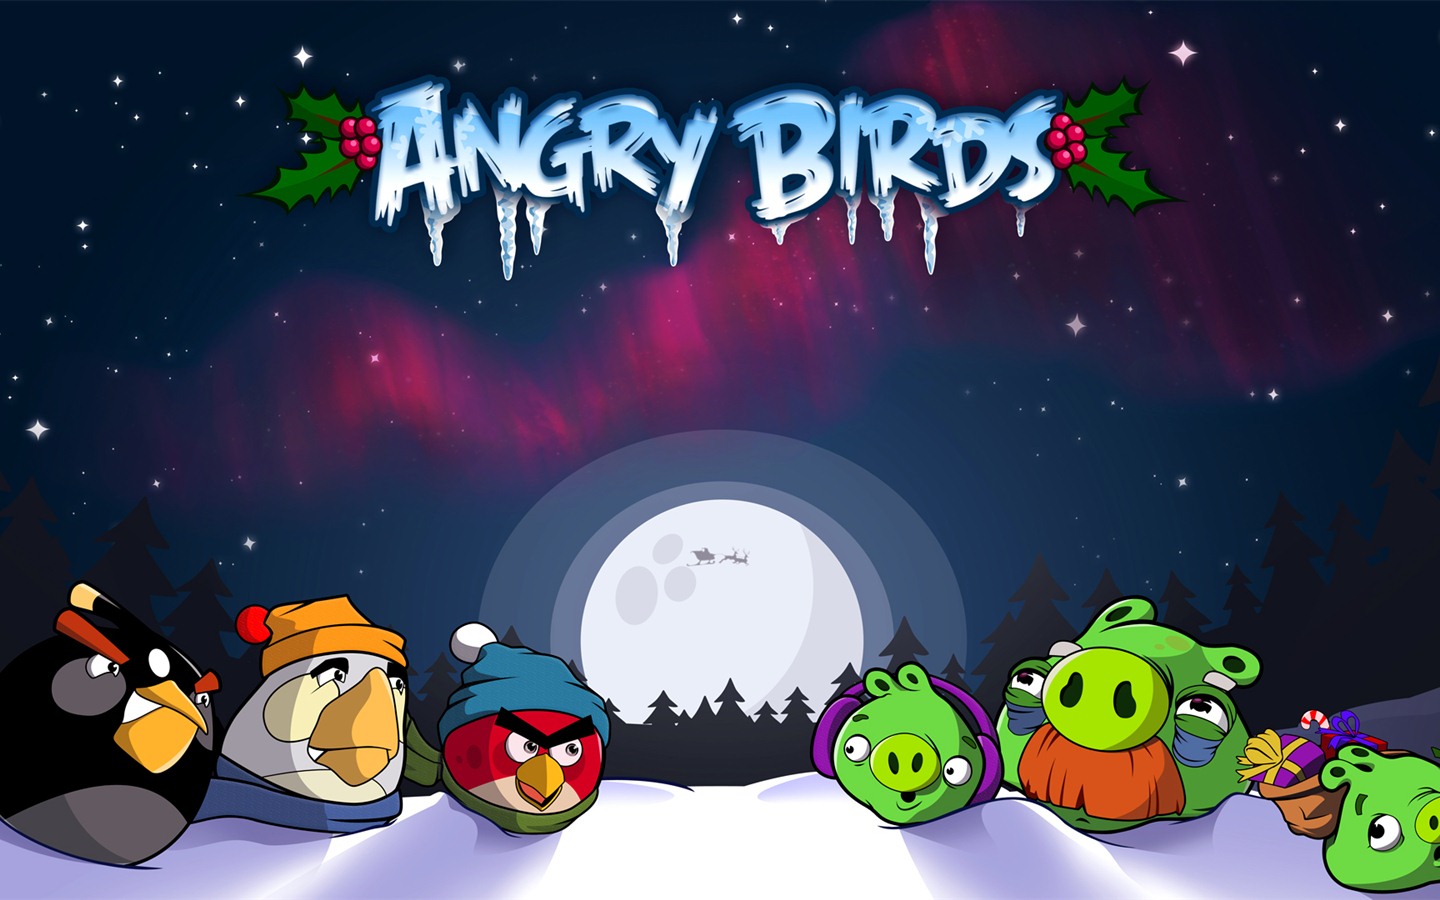 Angry Birds Game Wallpapers #27 - 1440x900